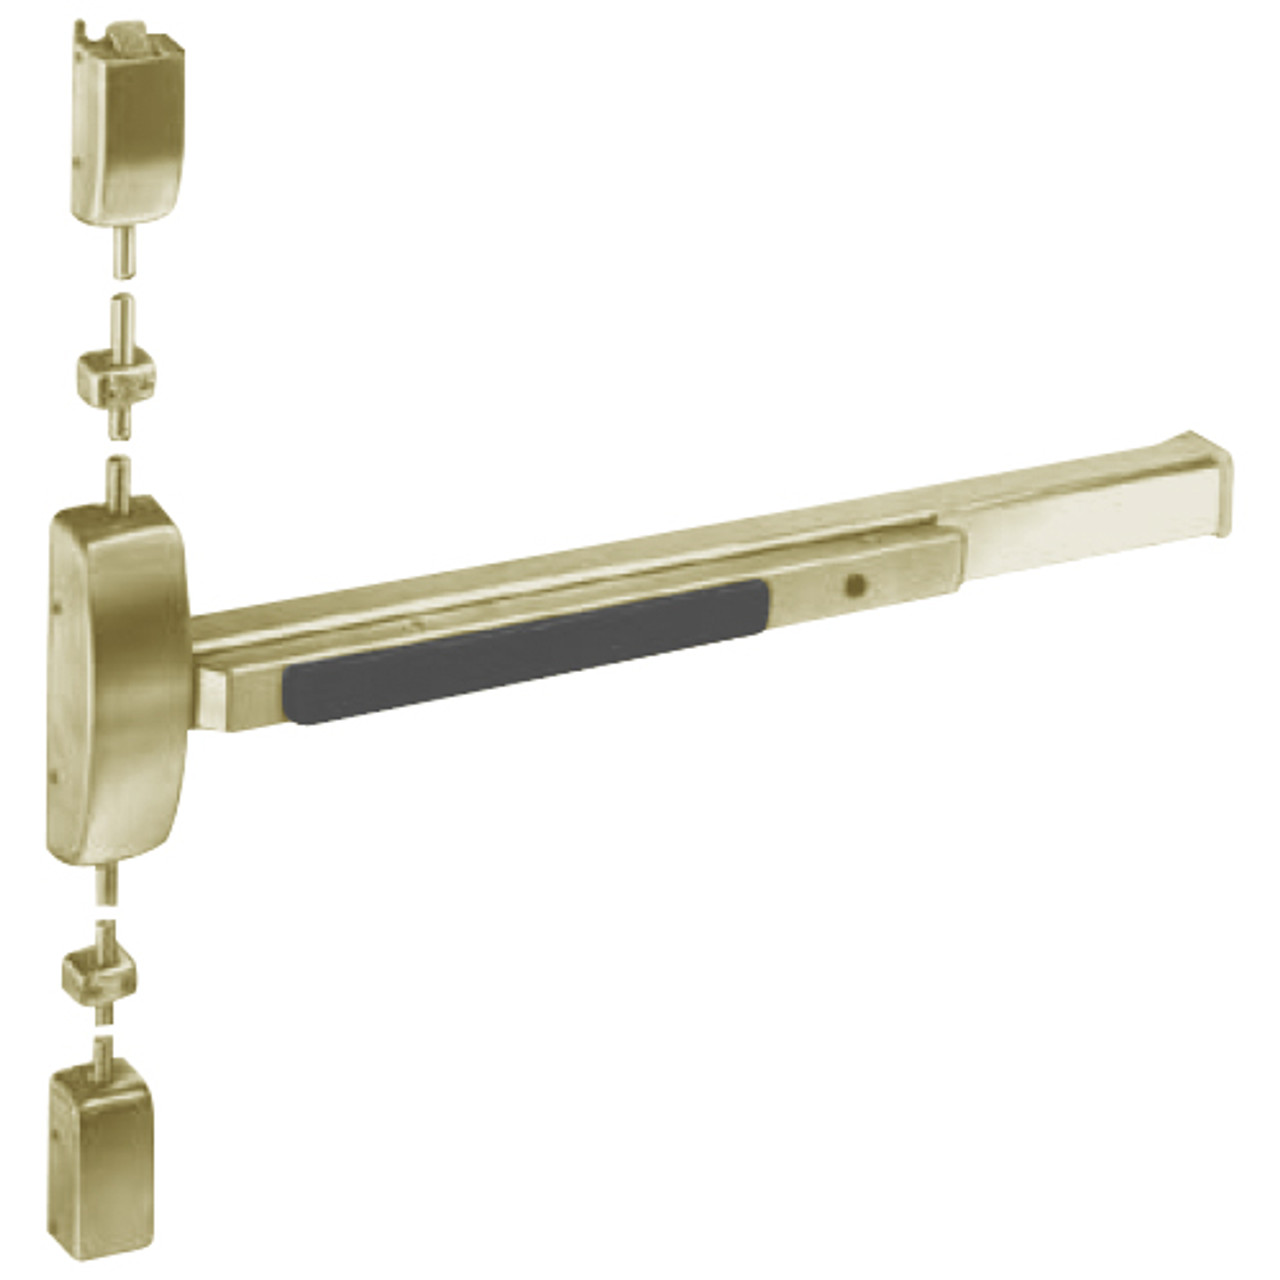 8710J-LHR-04 Sargent 80 Series Exit Only Surface Vertical Rod Exit Device in Satin Brass